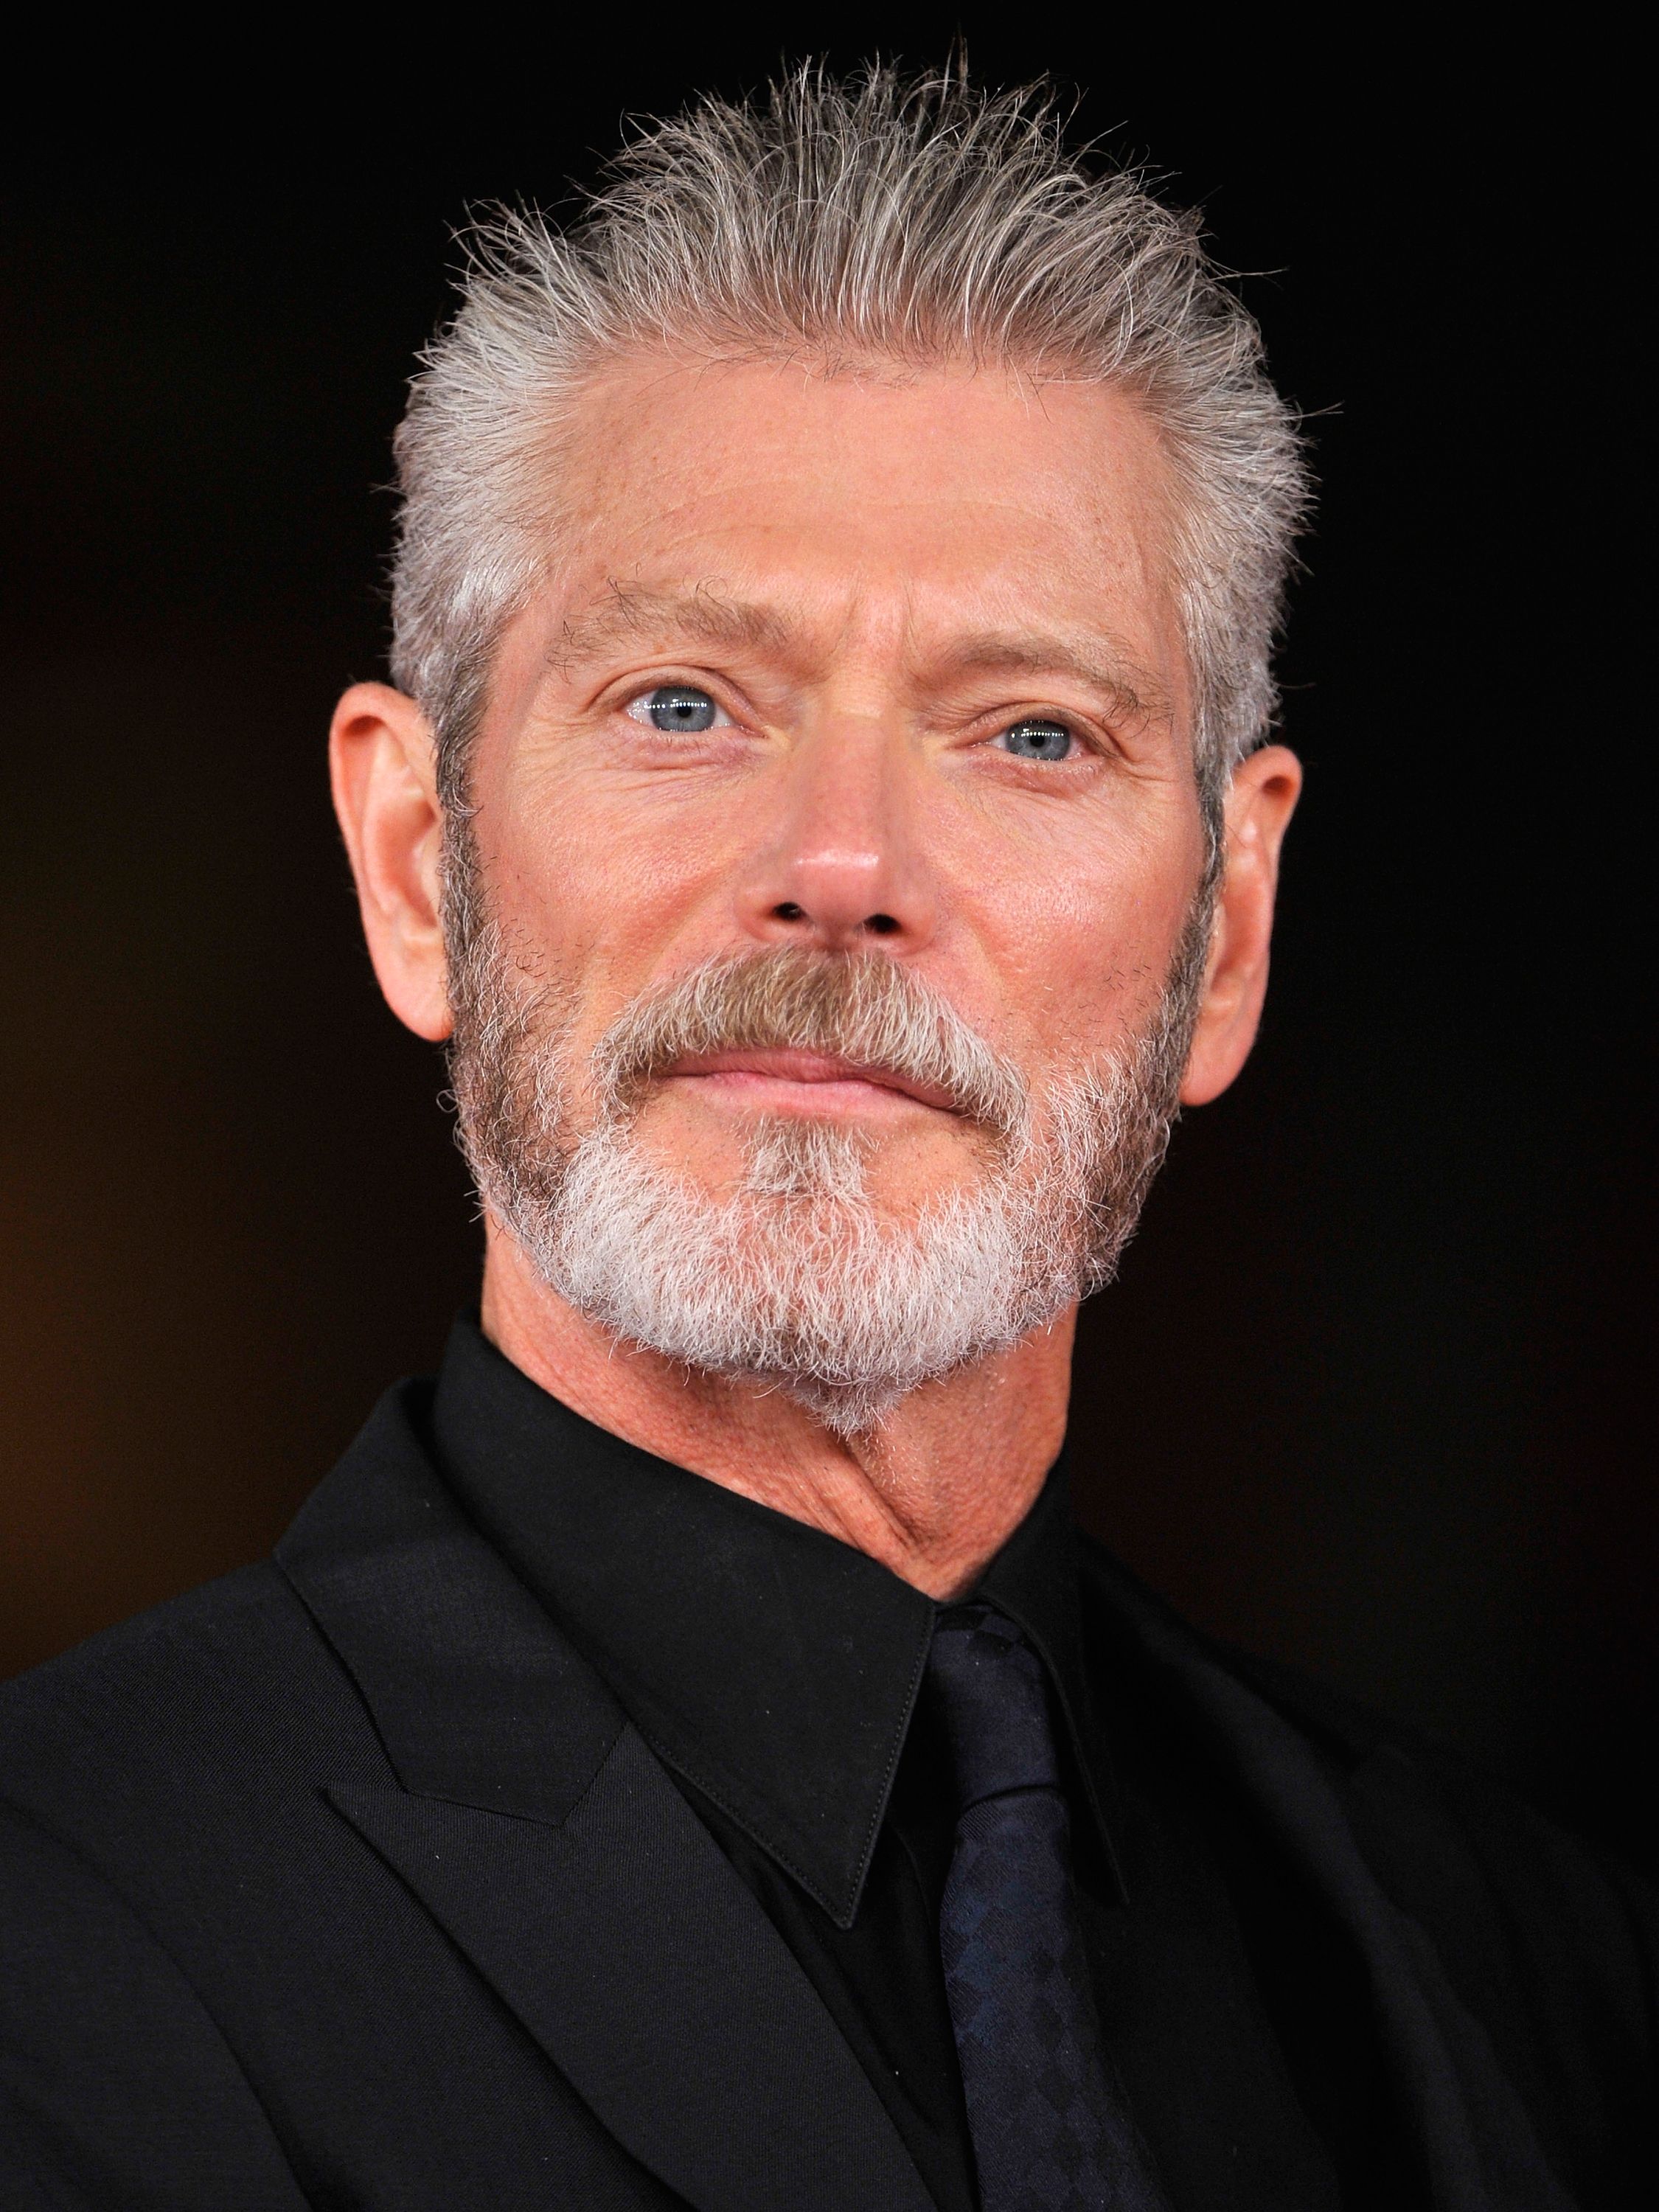 How tall is Stephen Lang?